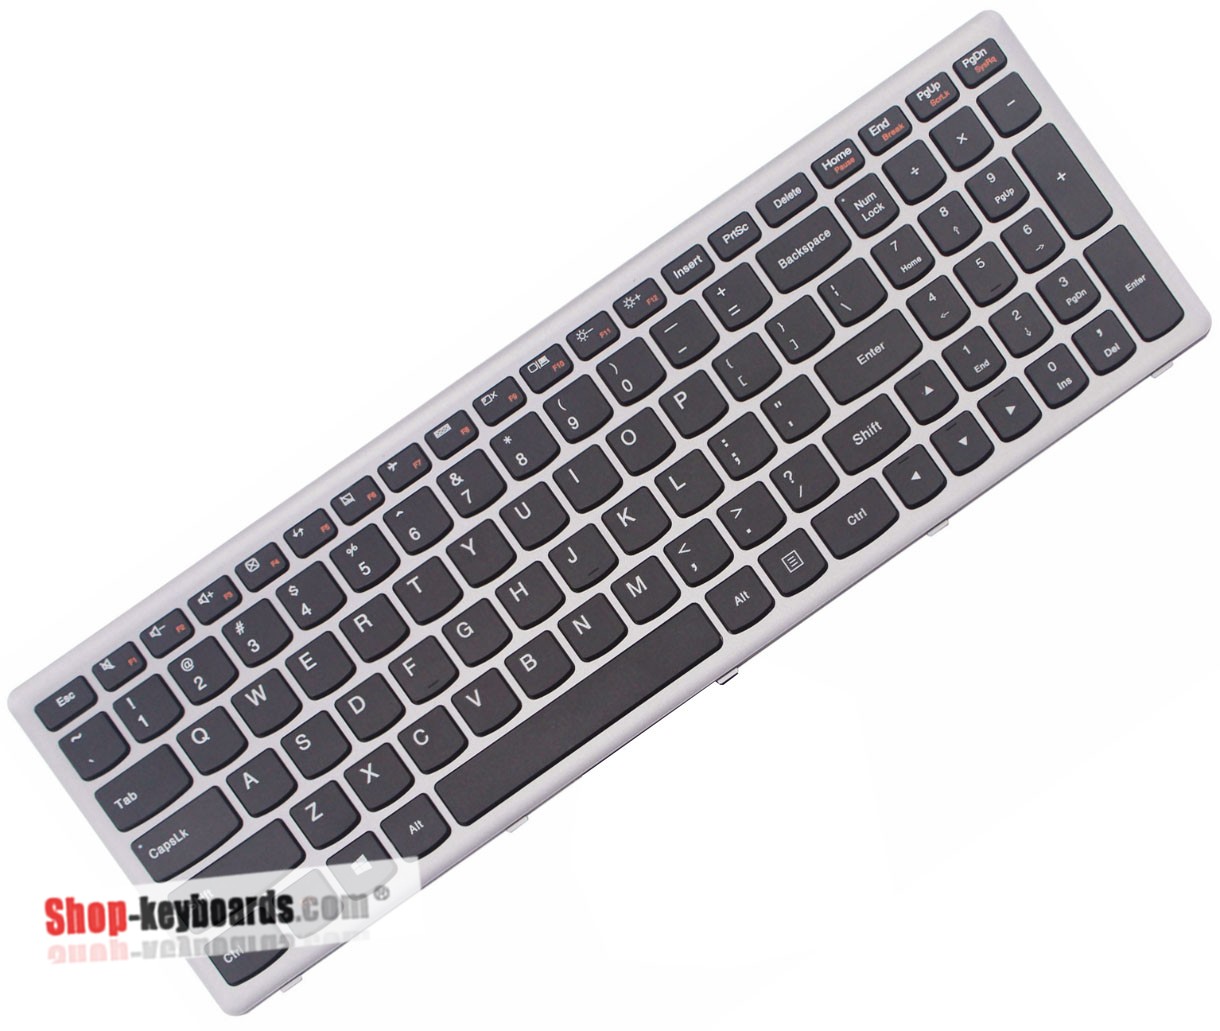 Lenovo Ideapad Z500G Keyboard replacement